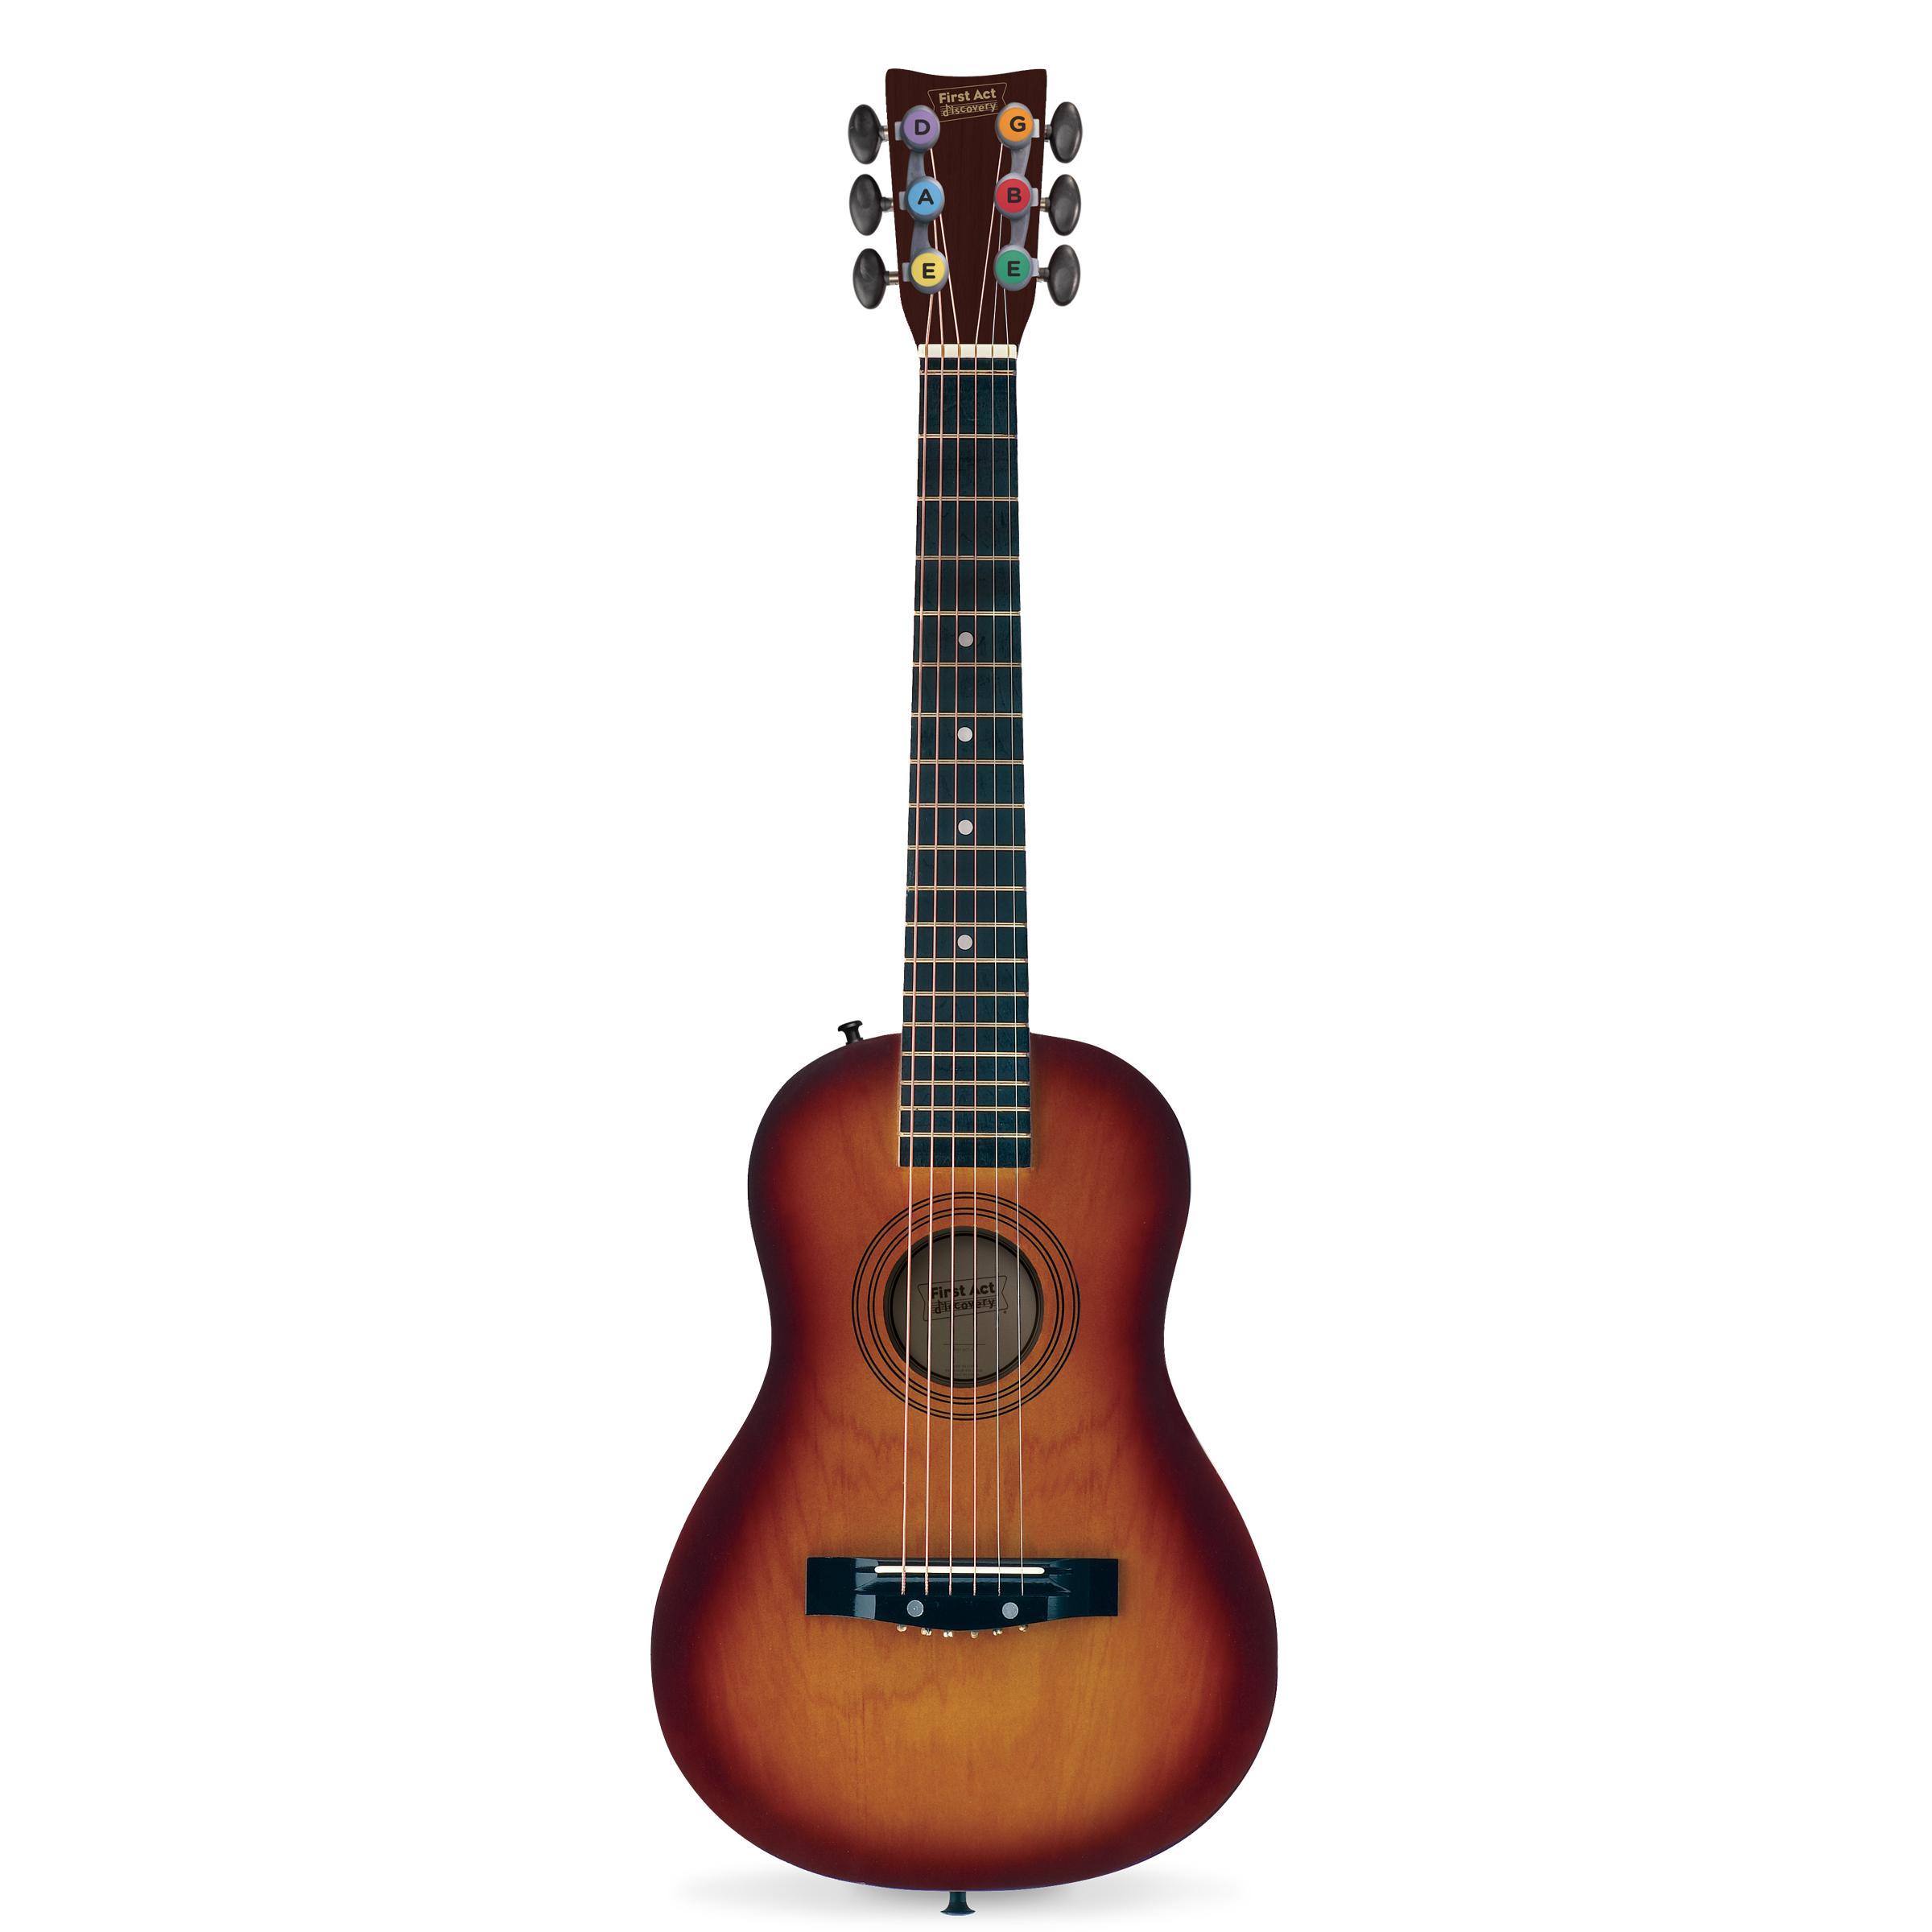 Amazon.com: First Act FG127 Acoustic Guitar: Musical ...